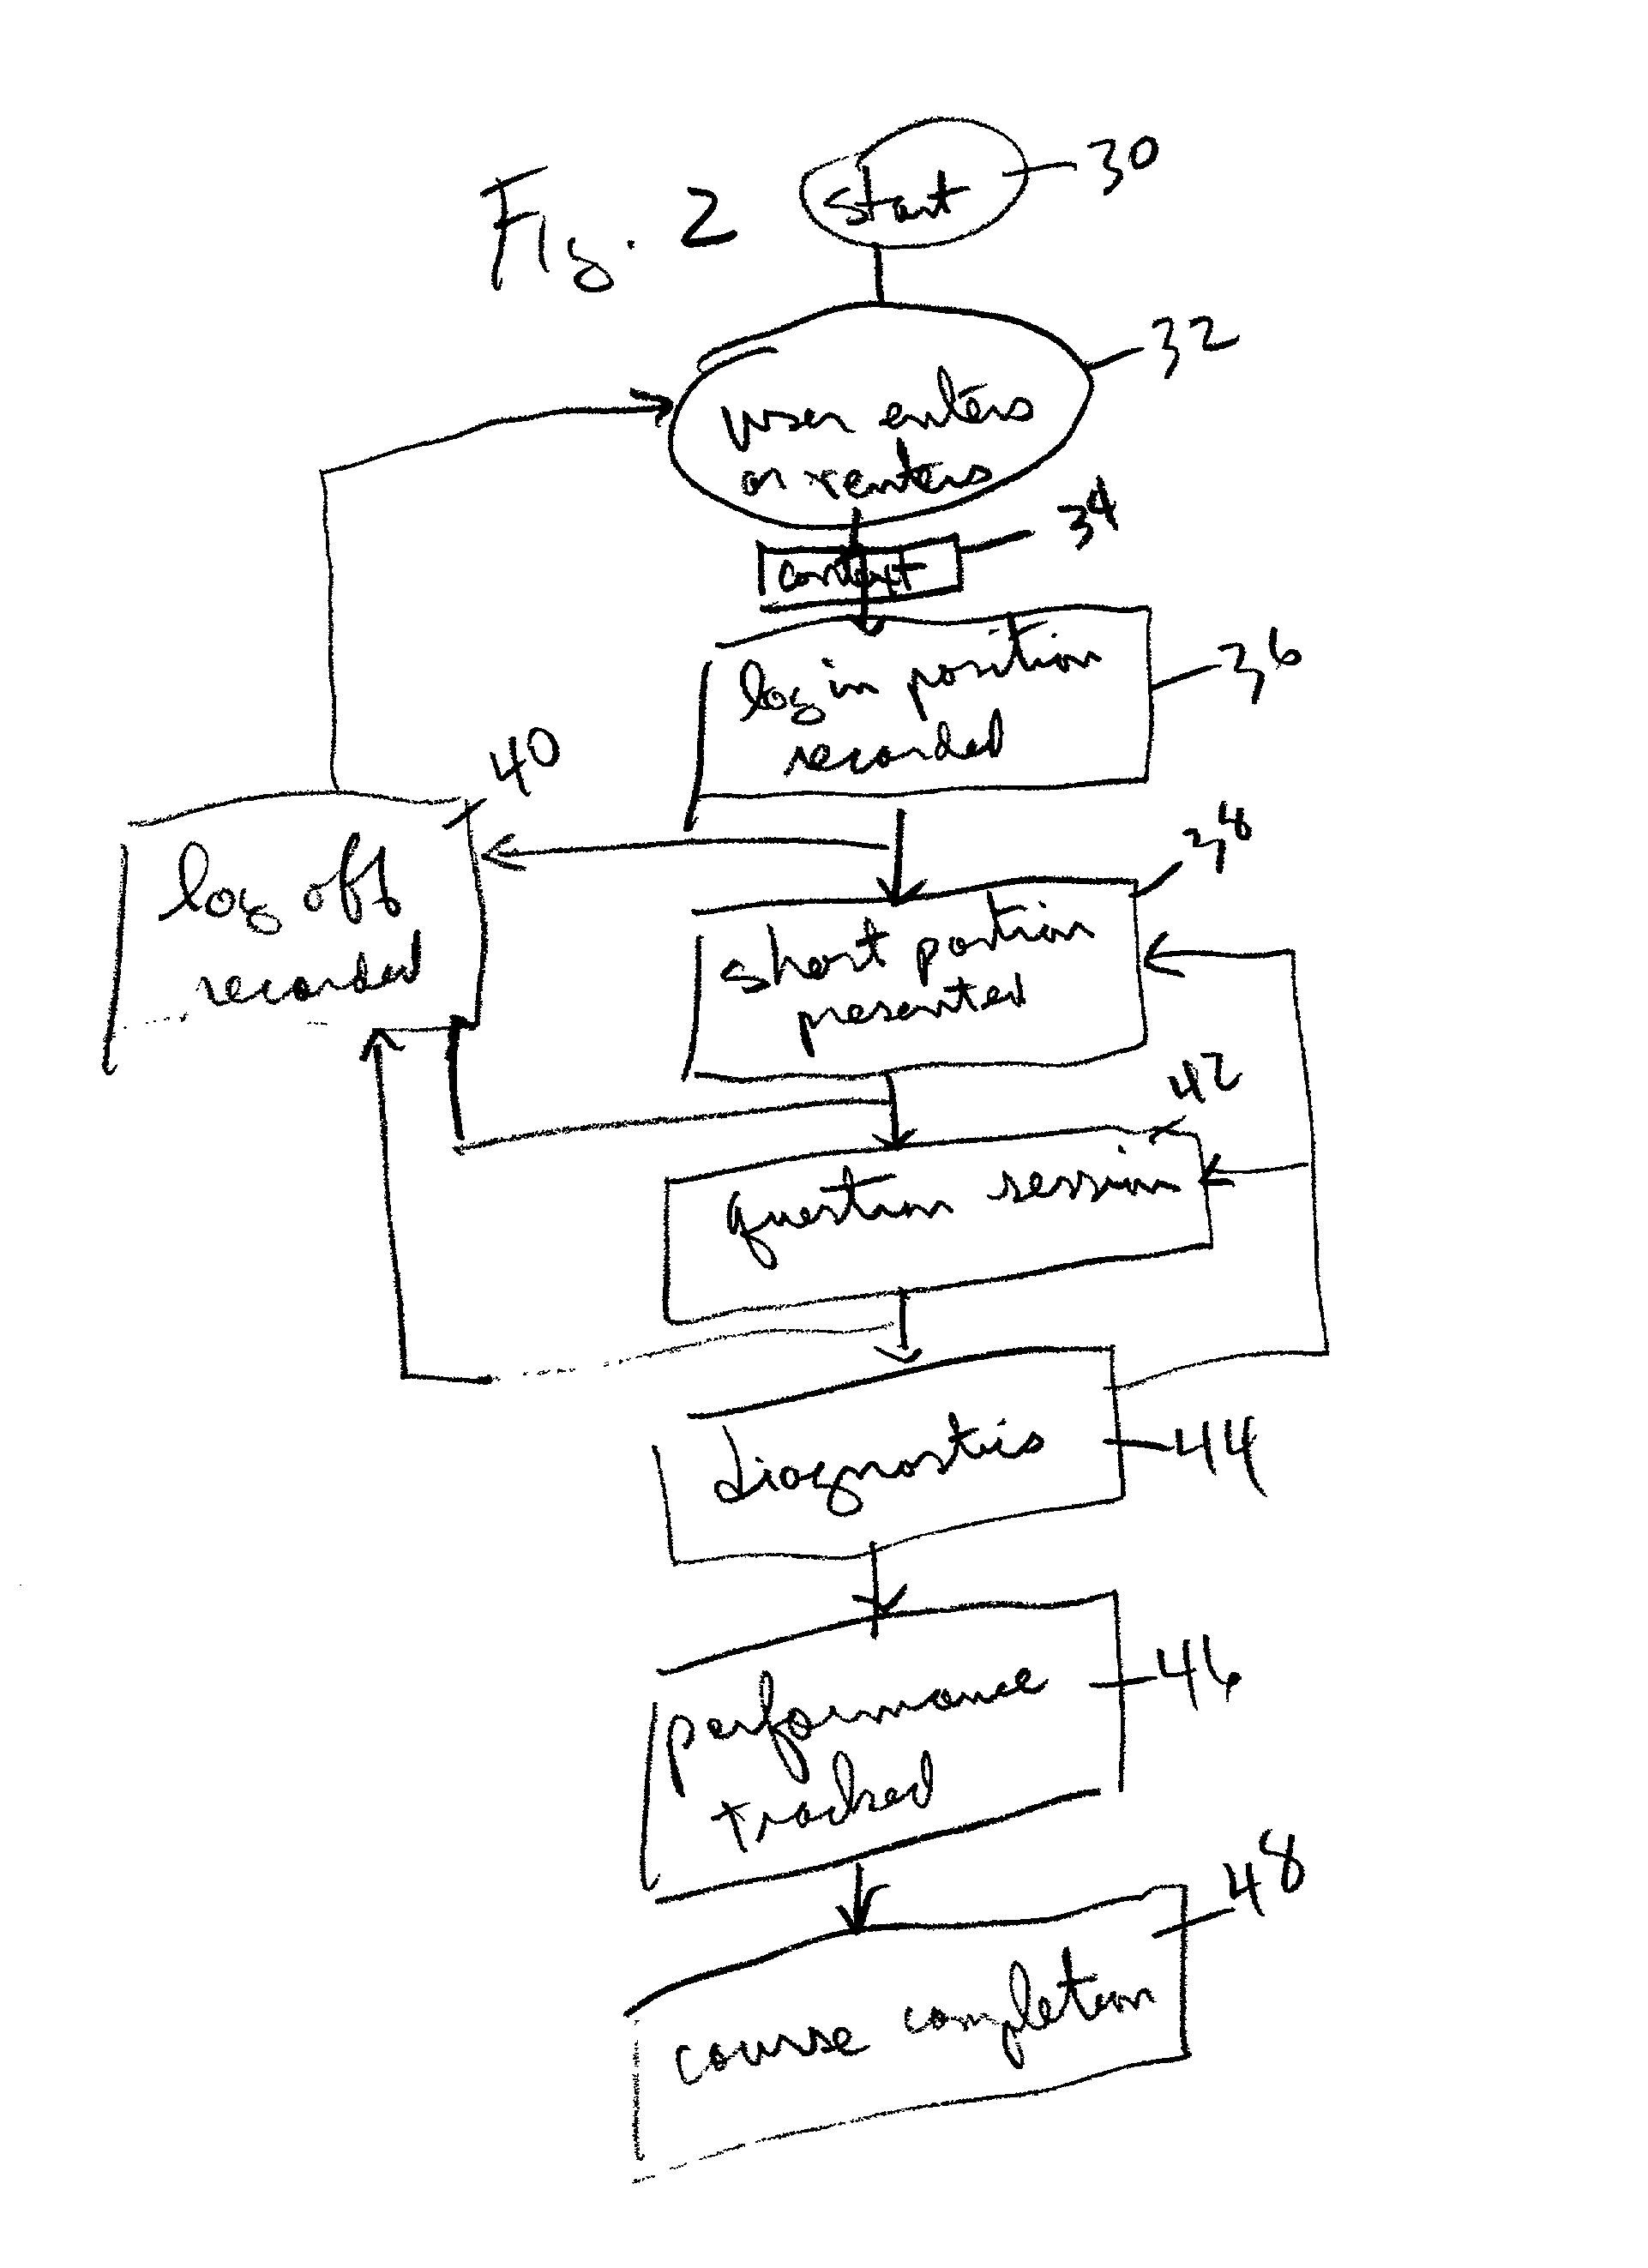 Method of conducting continuing education programs